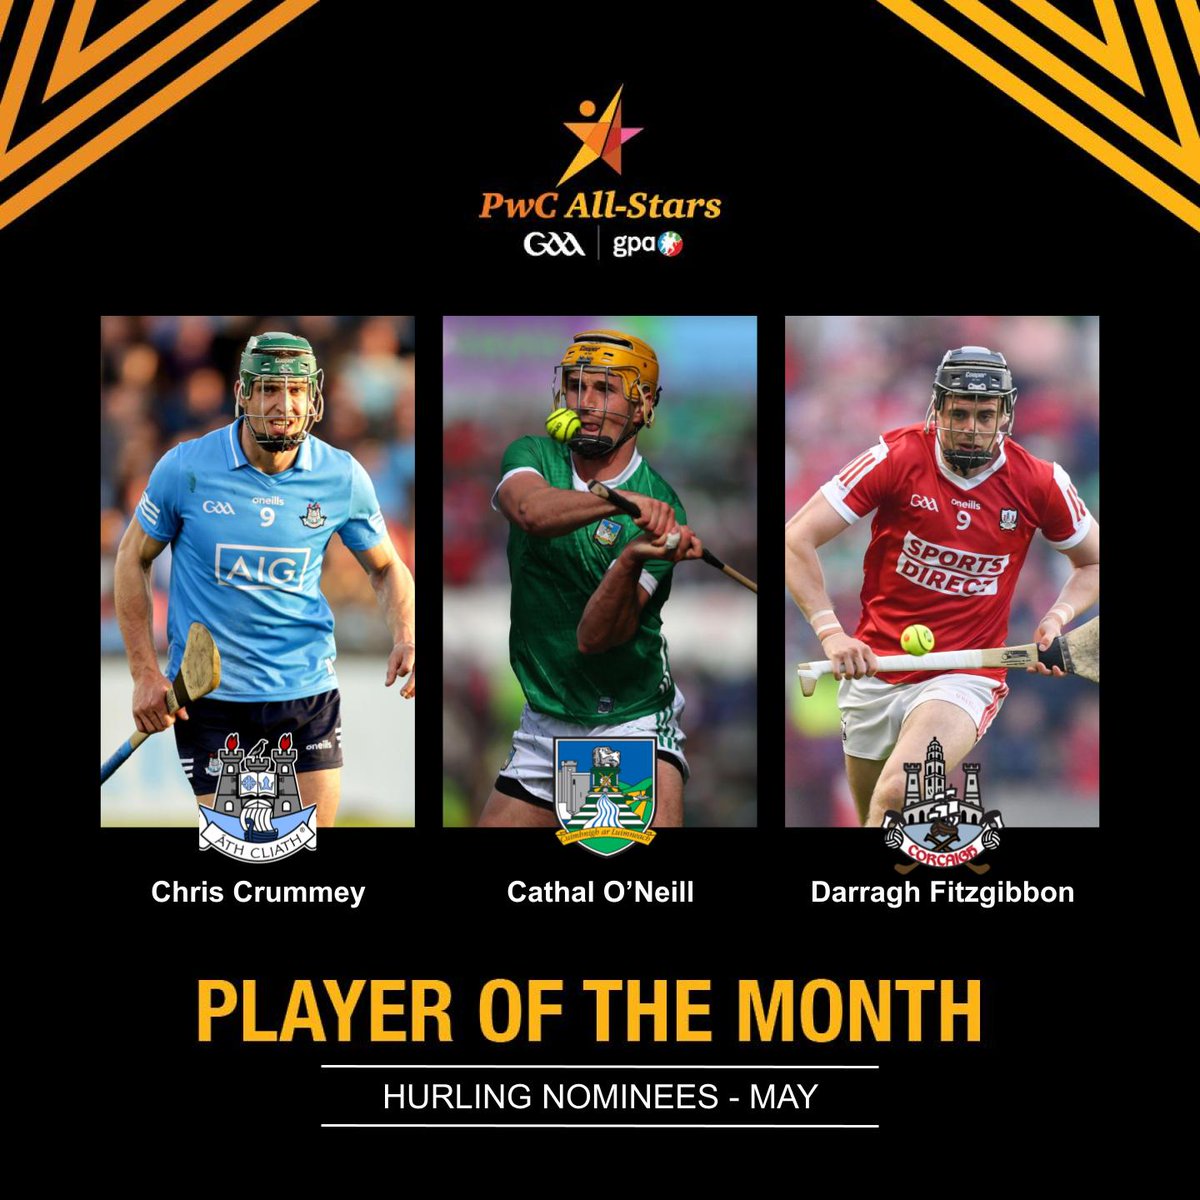 🥁 Introducing the nominees for the PwC @officialgaa / @gaelicplayers Hurling Player of the Month for May: ⭐ Chris Crummey - @DubGAAOfficial ⭐ Cathal O'Neill - @LimerickCLG ⭐ Darragh Fitzgibbon - @OfficialCorkGAA Who will win? #PwCAllStars